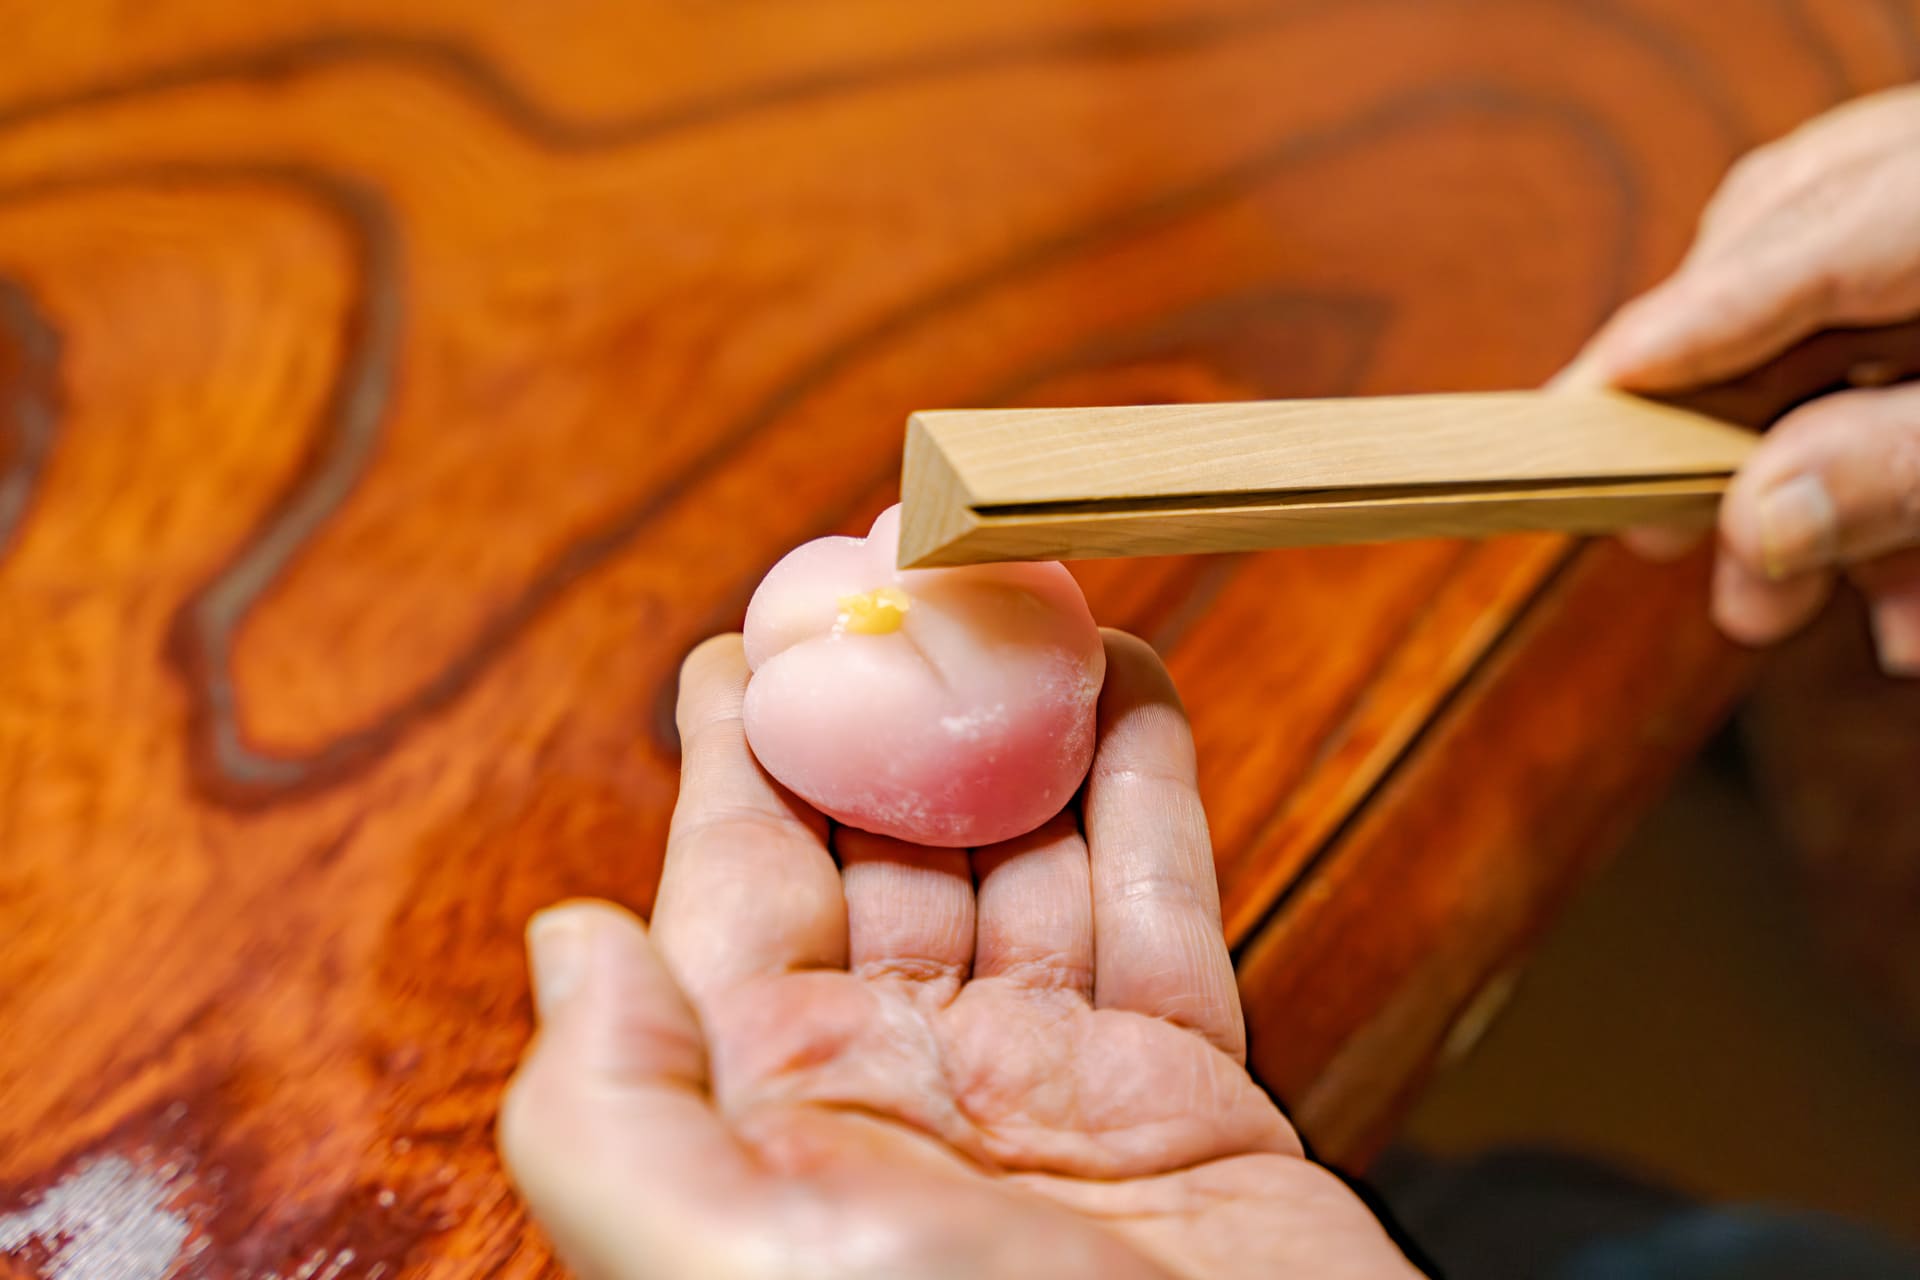 Japanese Cultural Experiences at Kyoto Abeya. Close-up of a man's hands using wooden tongs to pick up a pink wagashi (Japanese sweet), with a wooden table surface.